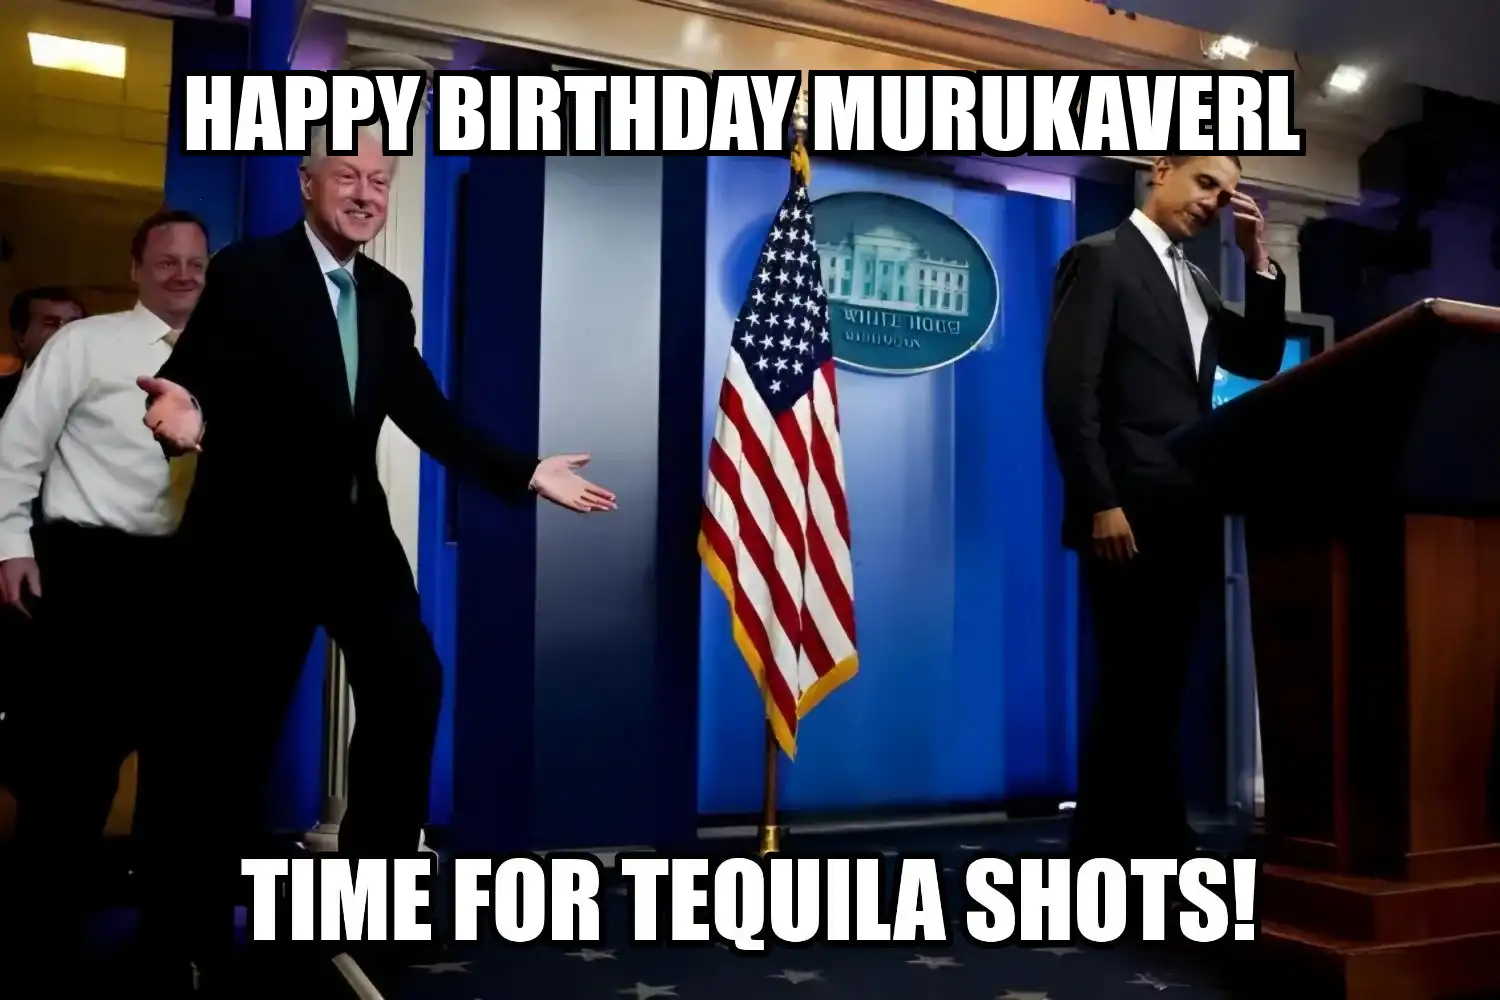 Happy Birthday Murukaverl Time For Tequila Shots Memes